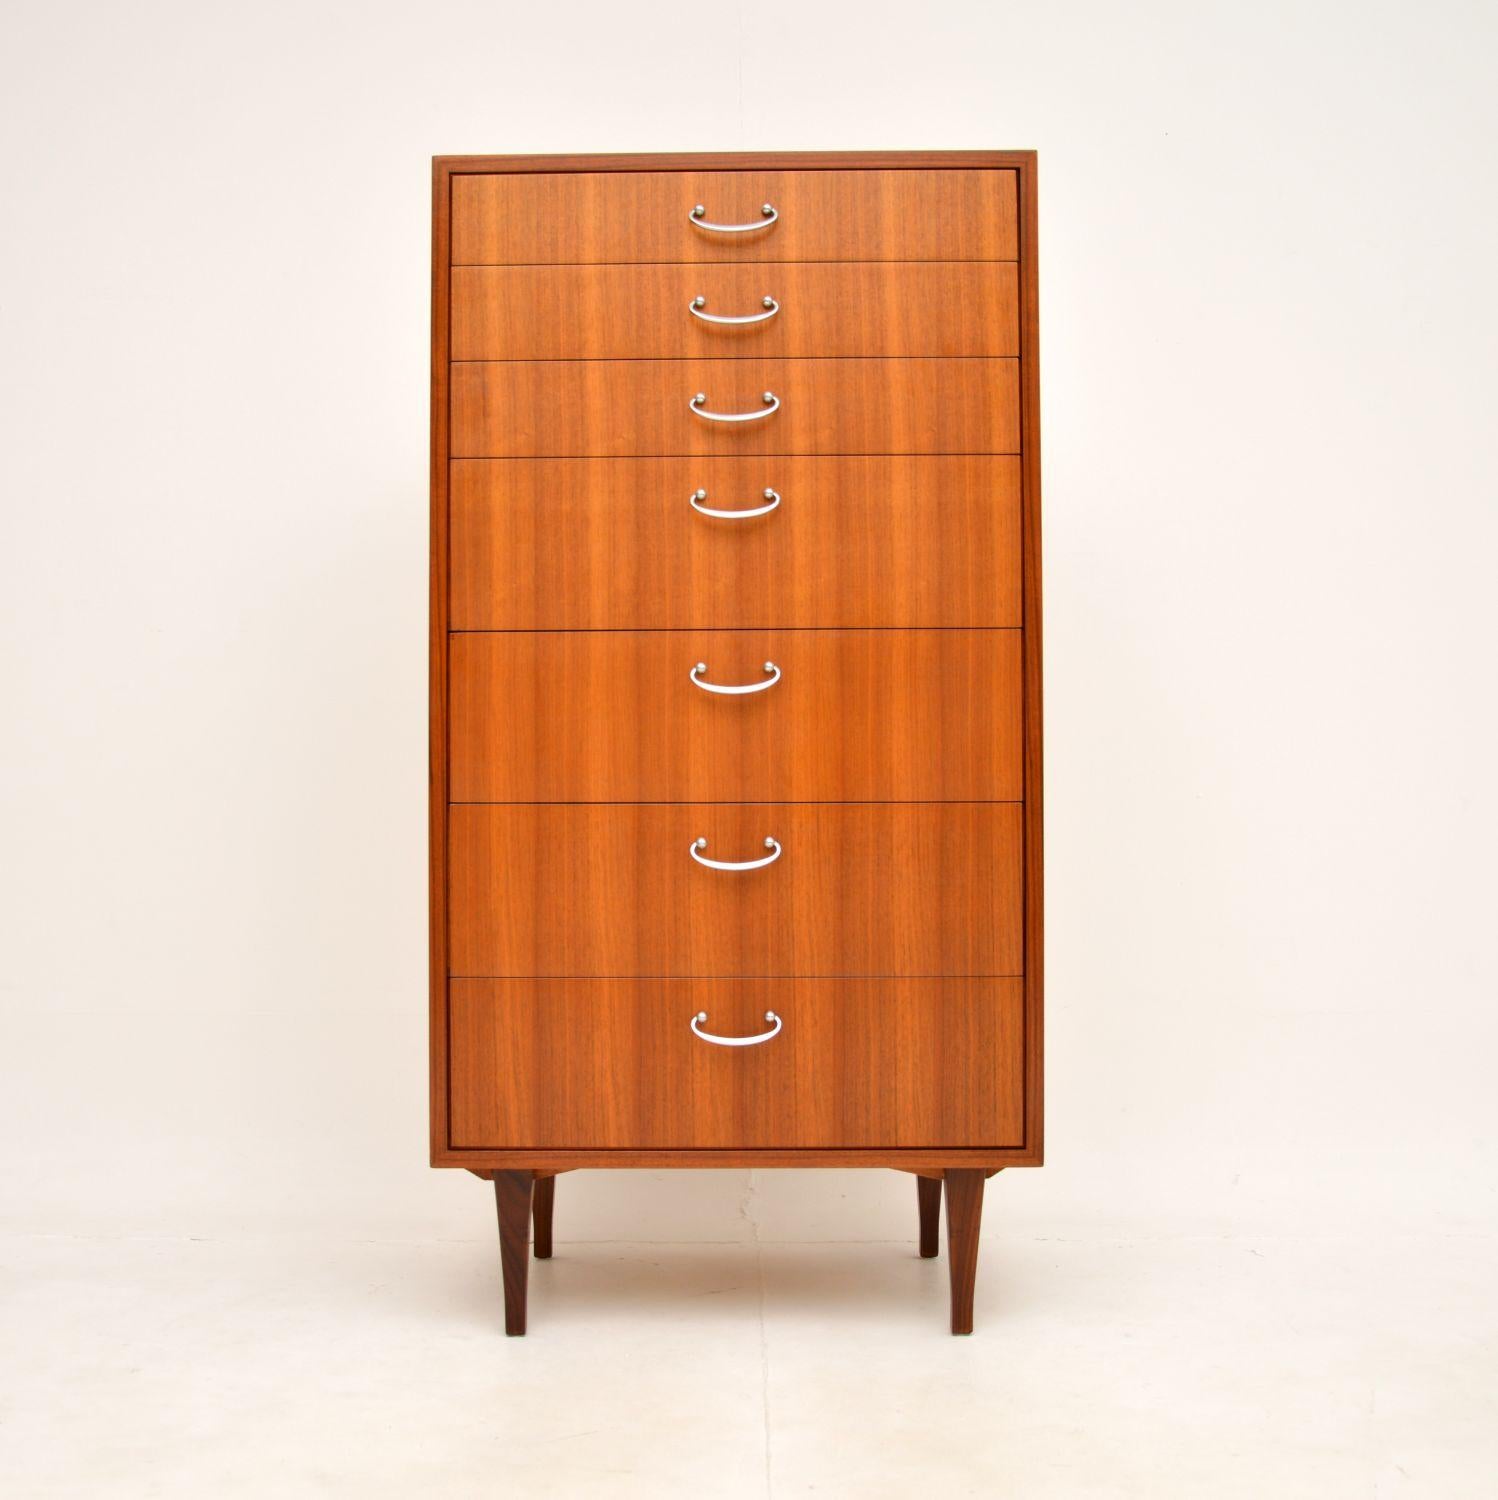 A stylish and very well made vintage walnut tallboy chest of drawers. This was made in England by Meredew, it dates from the 1950-60’s.

It is of superb quality and is a very useful size, offering lots of storage space yet not taking up too much